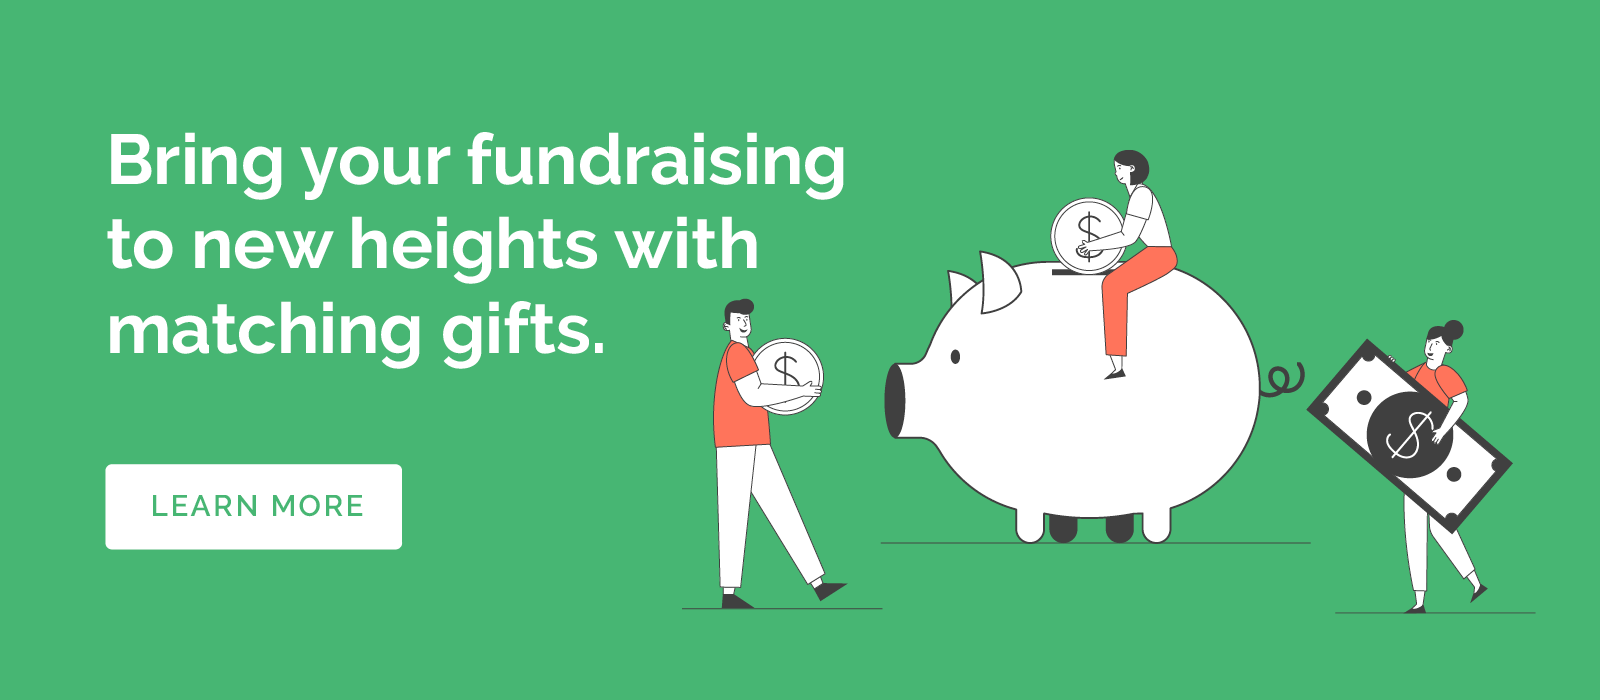 Supercharge your fundraising letters with matching gifts.